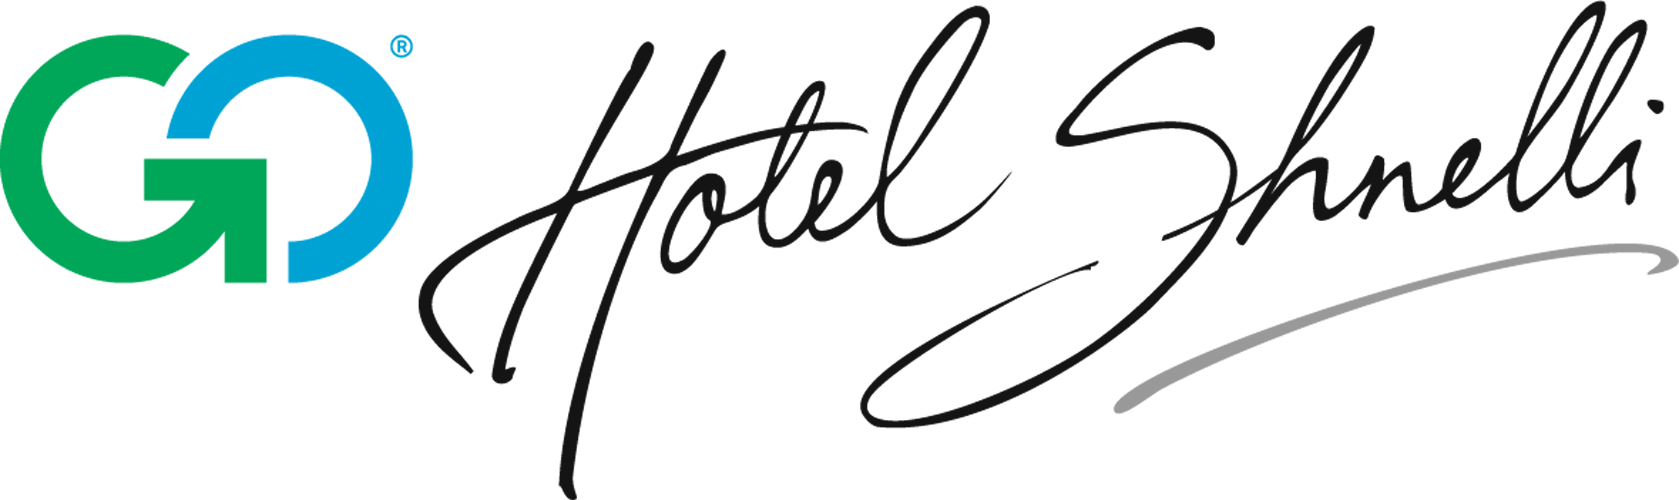 Go hotels